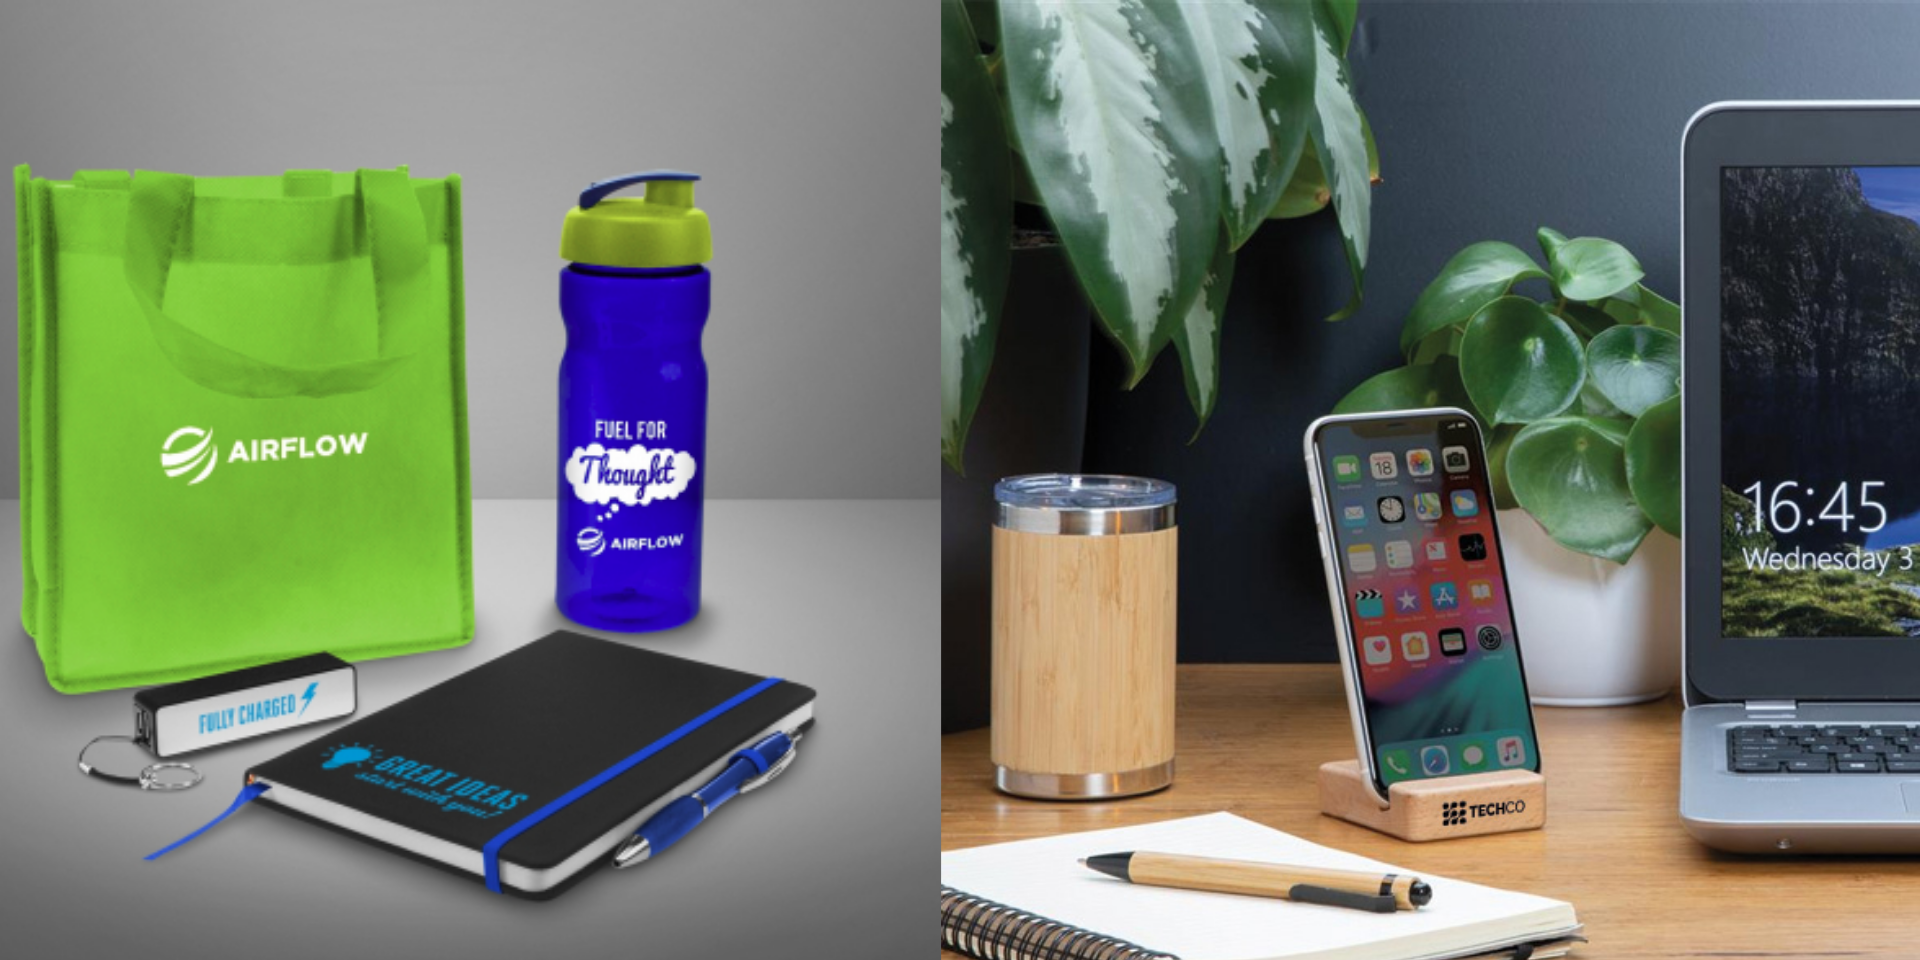 How to choose effective promotional products to engage customers.